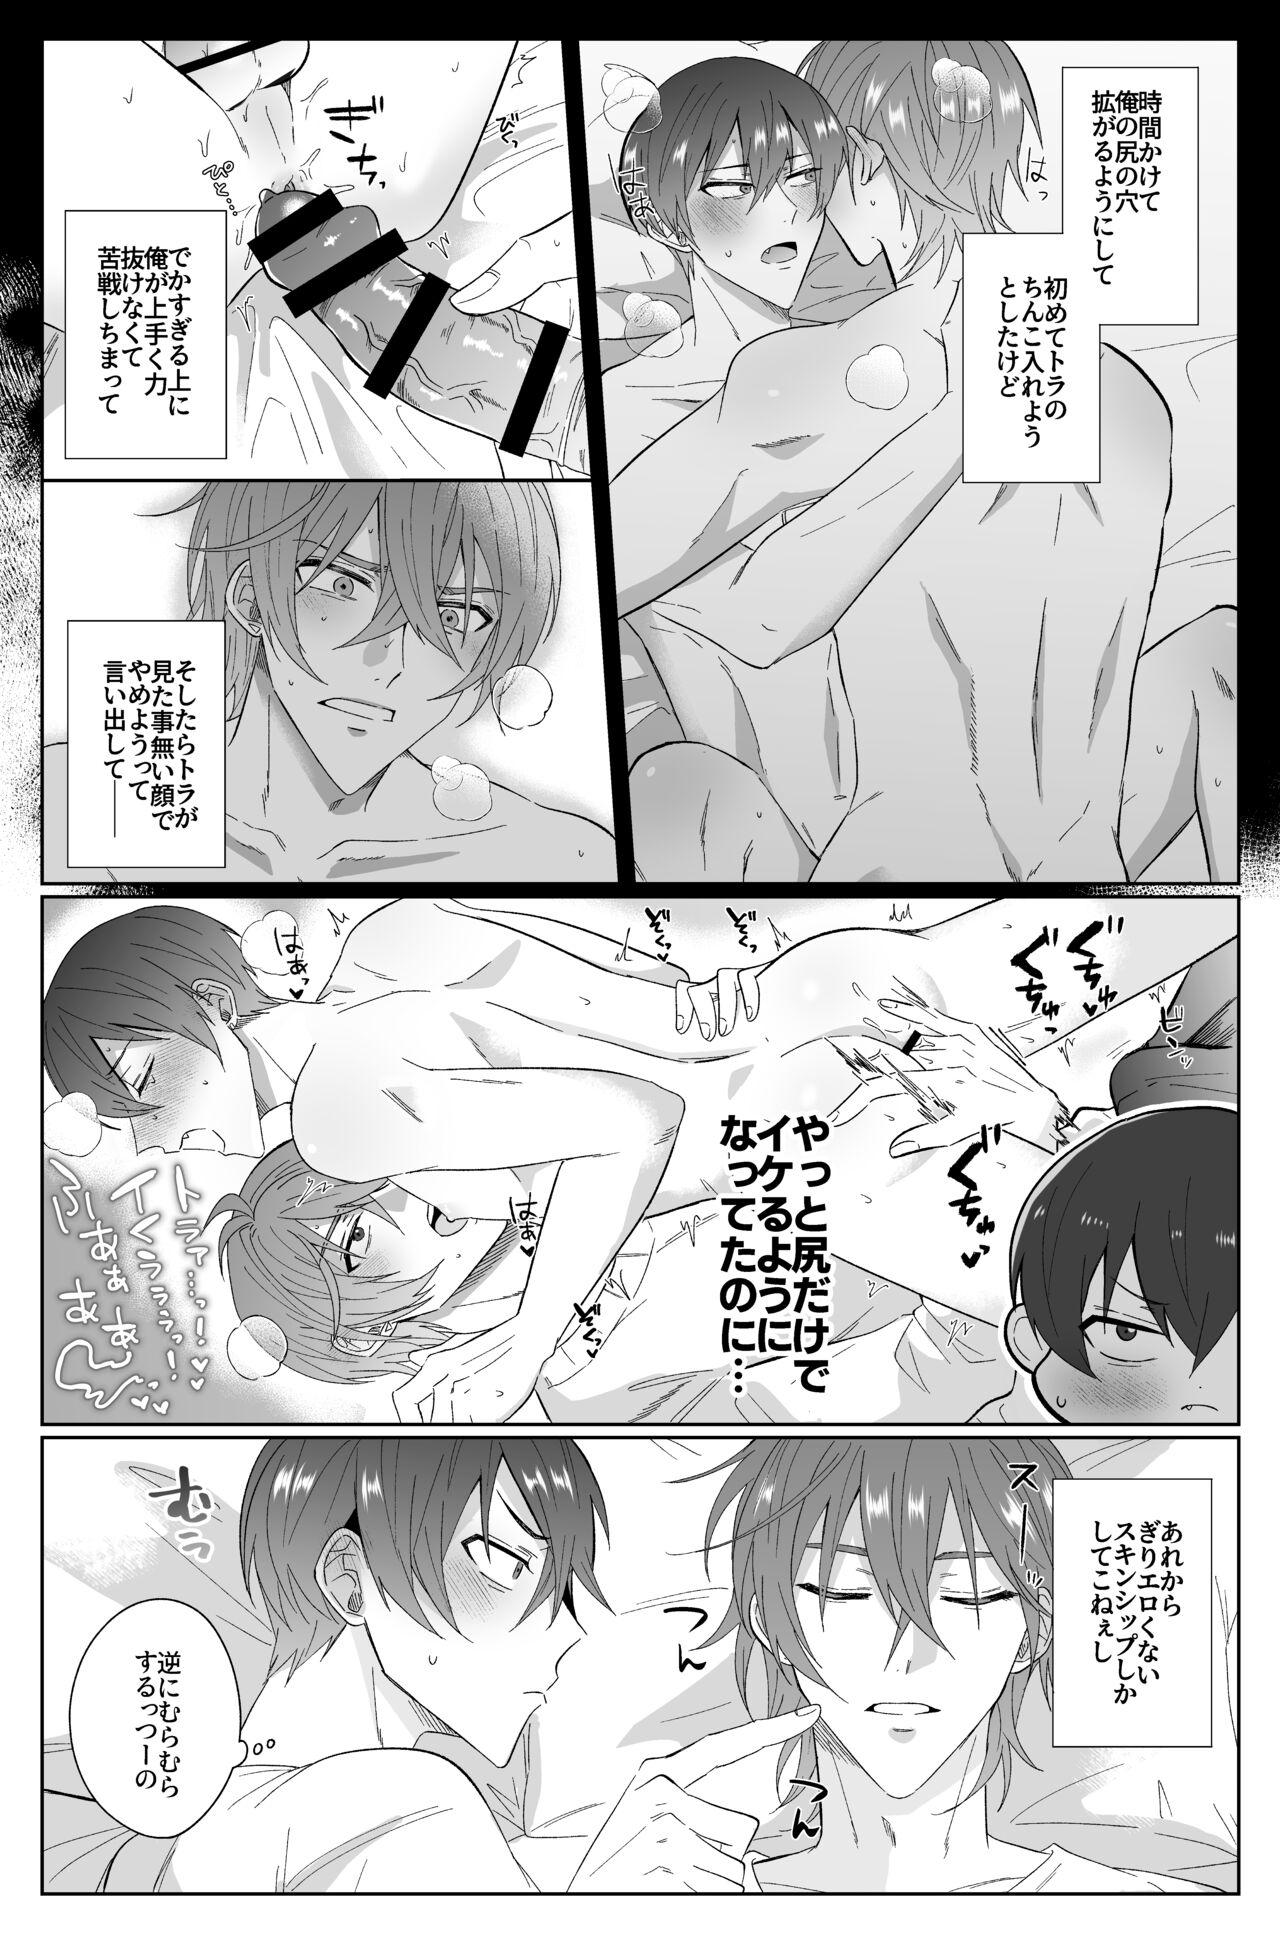 Facials Second Attempt - Idolish7 Nasty - Page 10